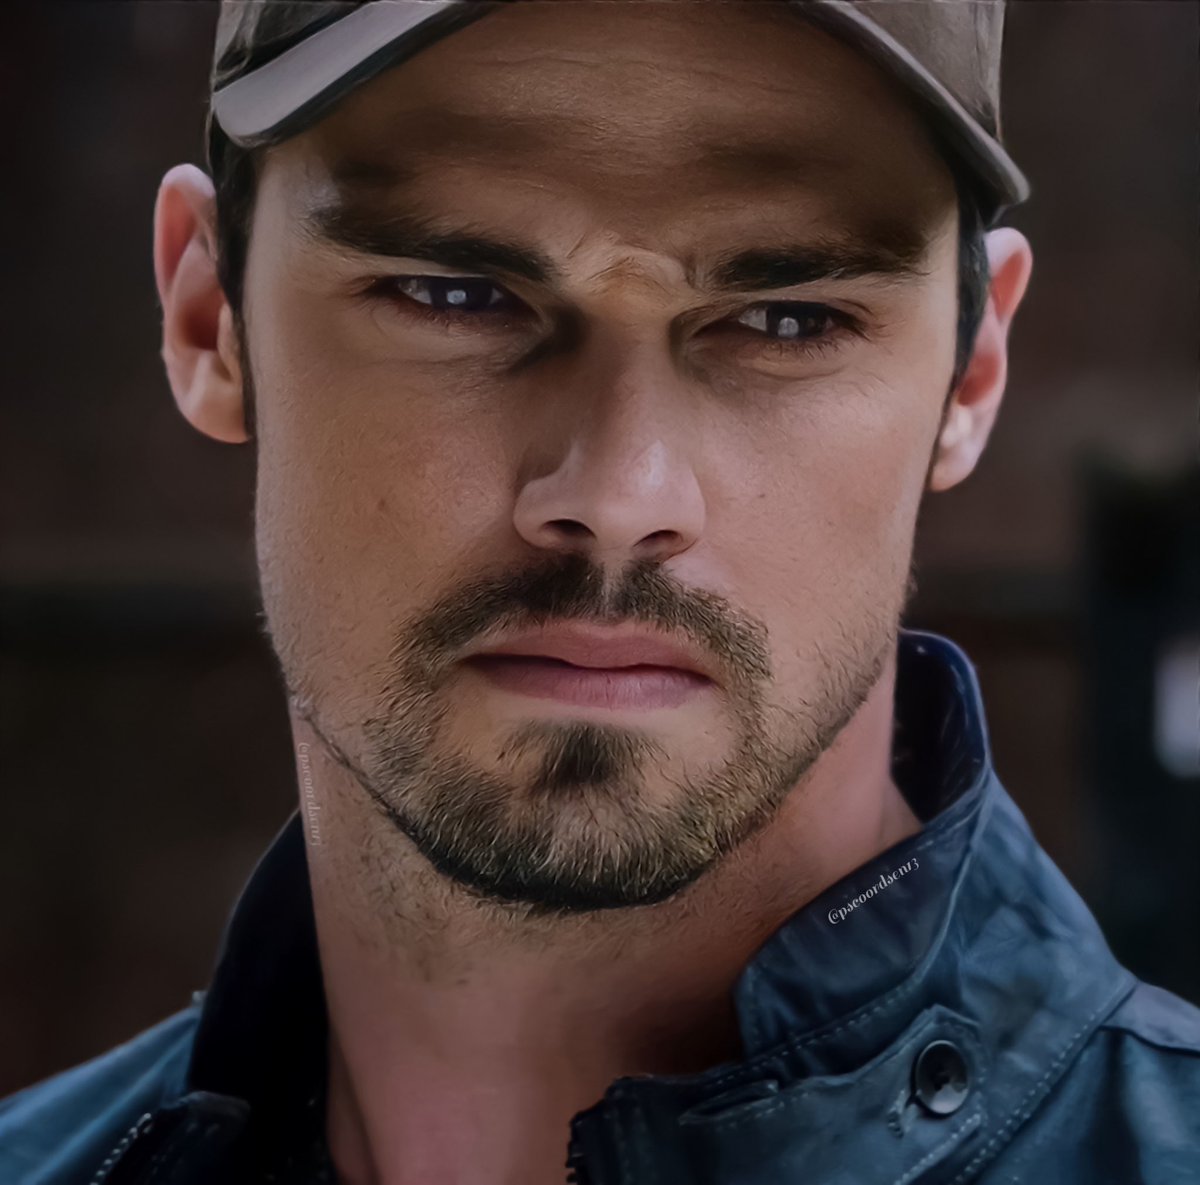 @tbrock623 @57Veronica My pleasure, Tracey and thank you☺️. That is great, good for you🙌🏼😊! Have a peaceful Saturday and weekend to you and you all🌹🥰💕.

#JustJayRyan #EverydayGorgeous 

#BatB  #BeautyAndTheBeast